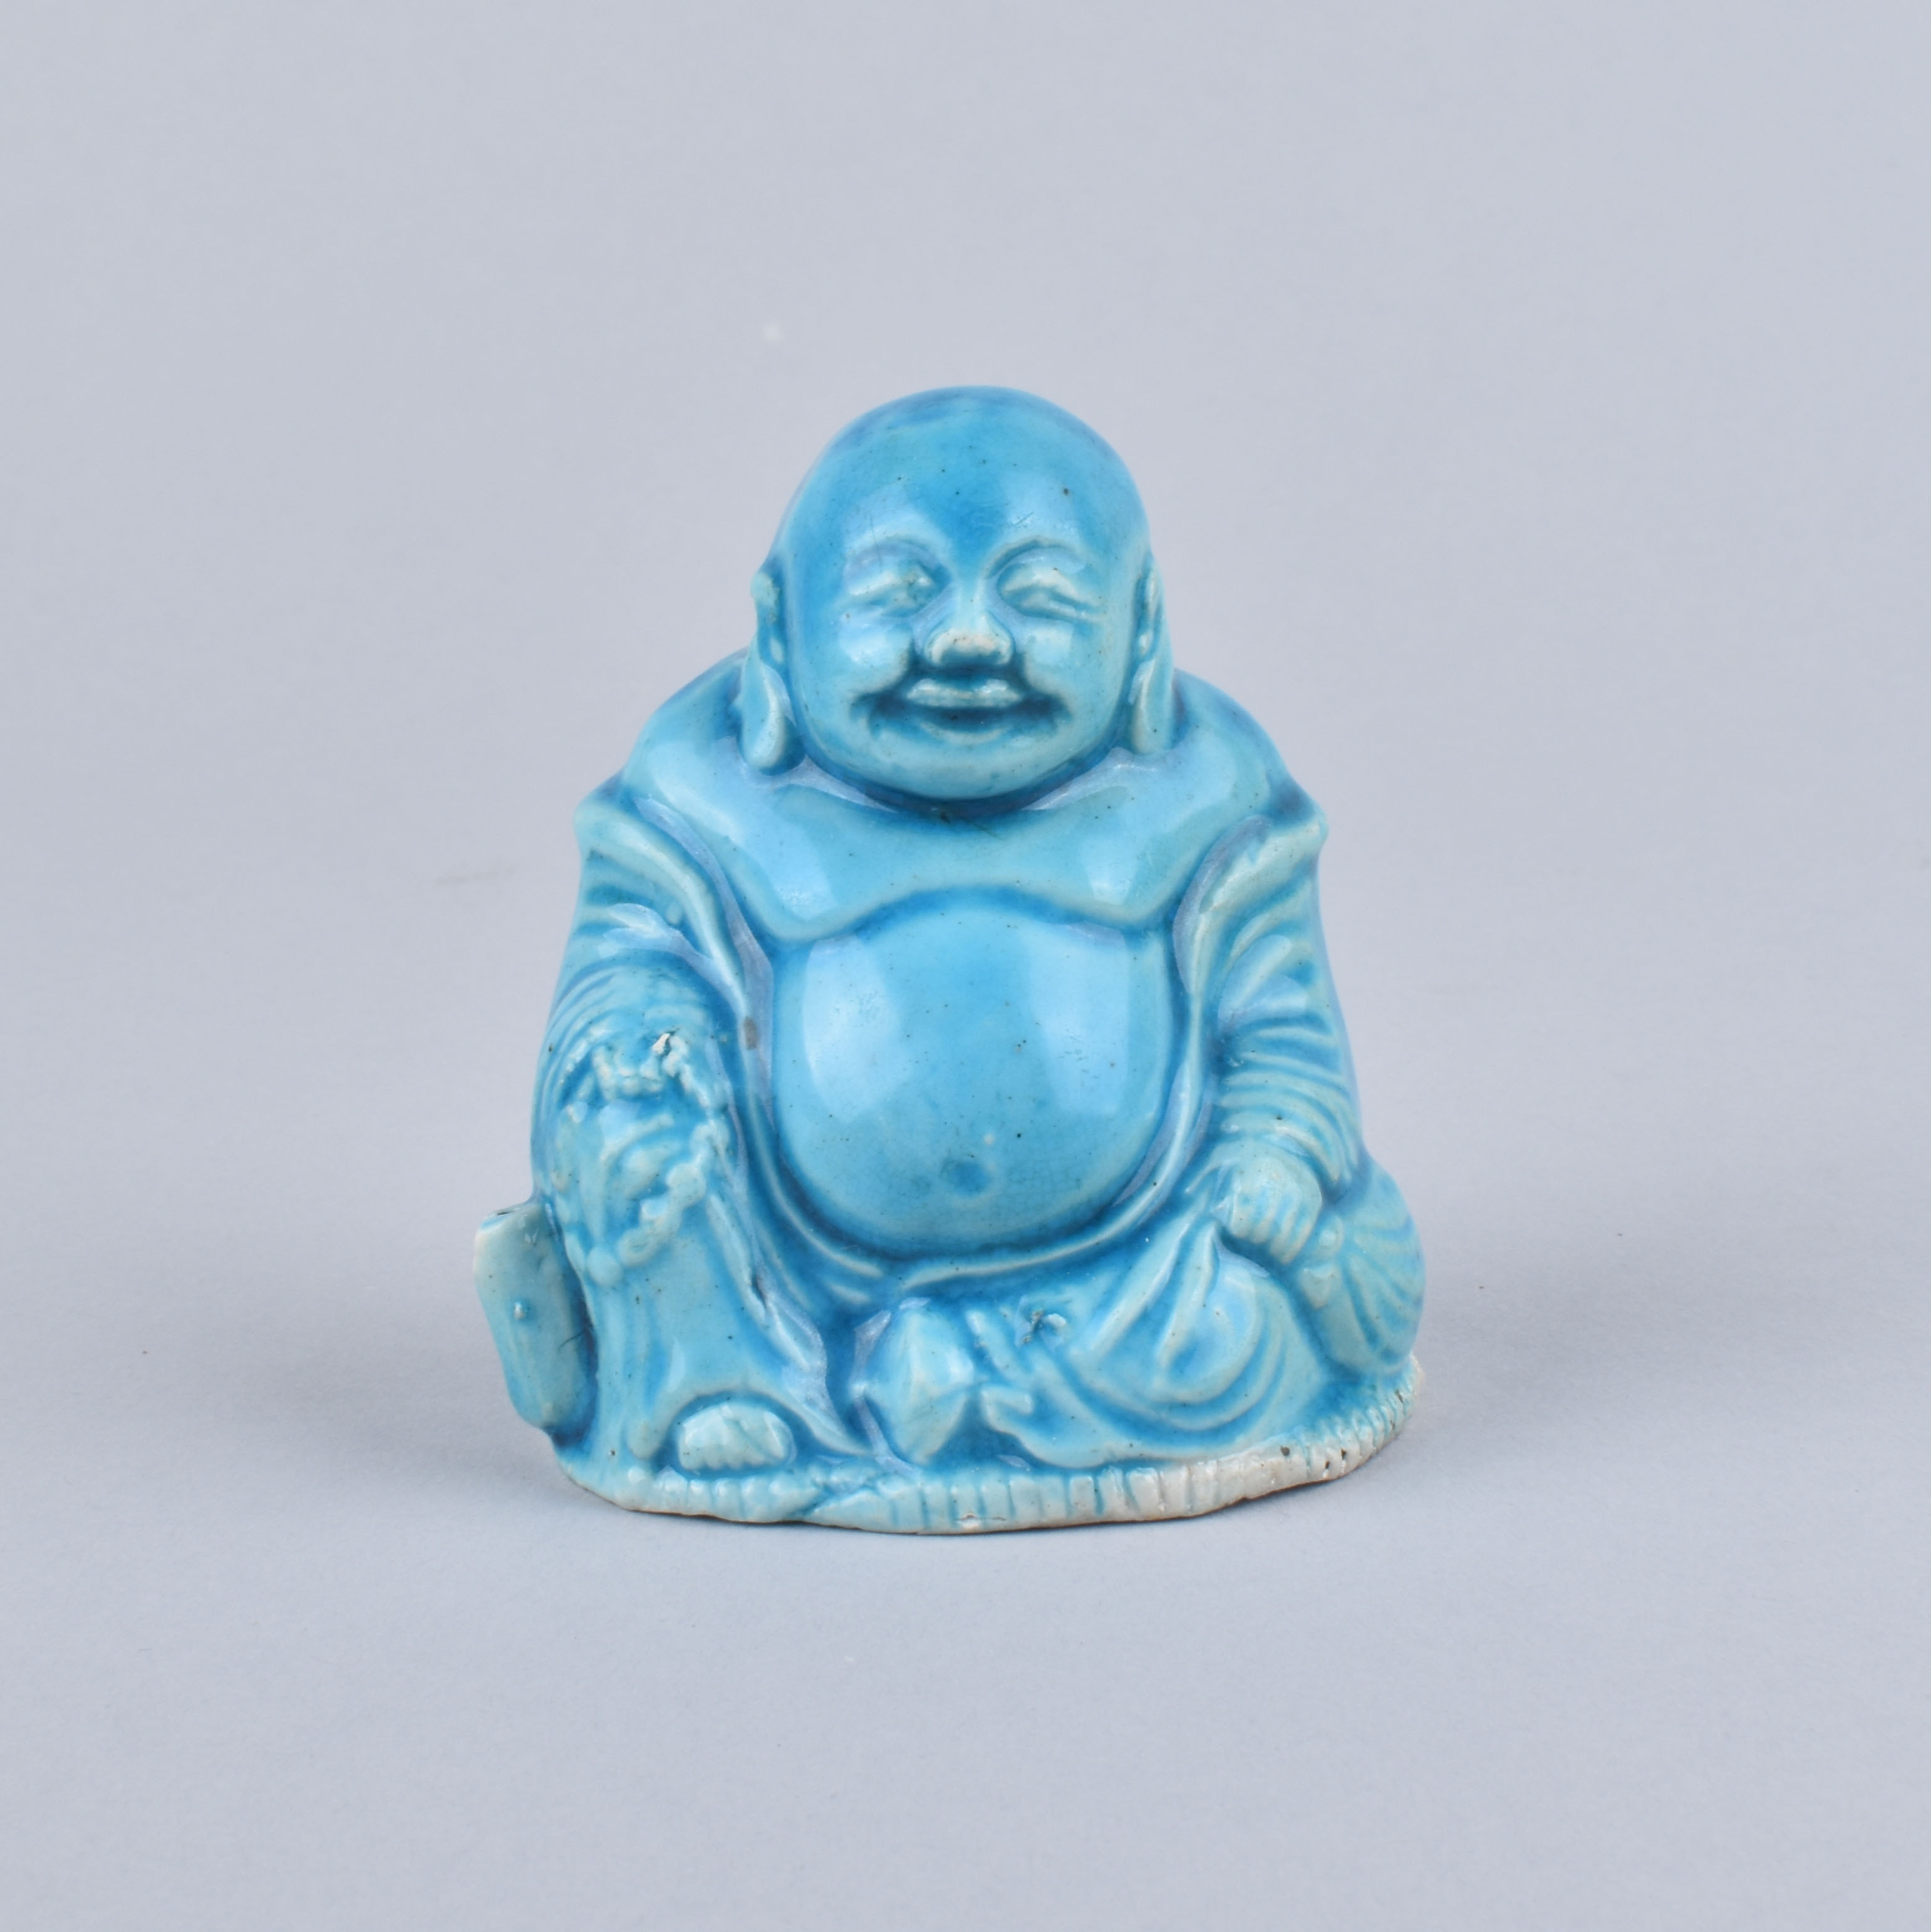 Porcelaine (biscuit) Kangxi (1662-1722), Chine